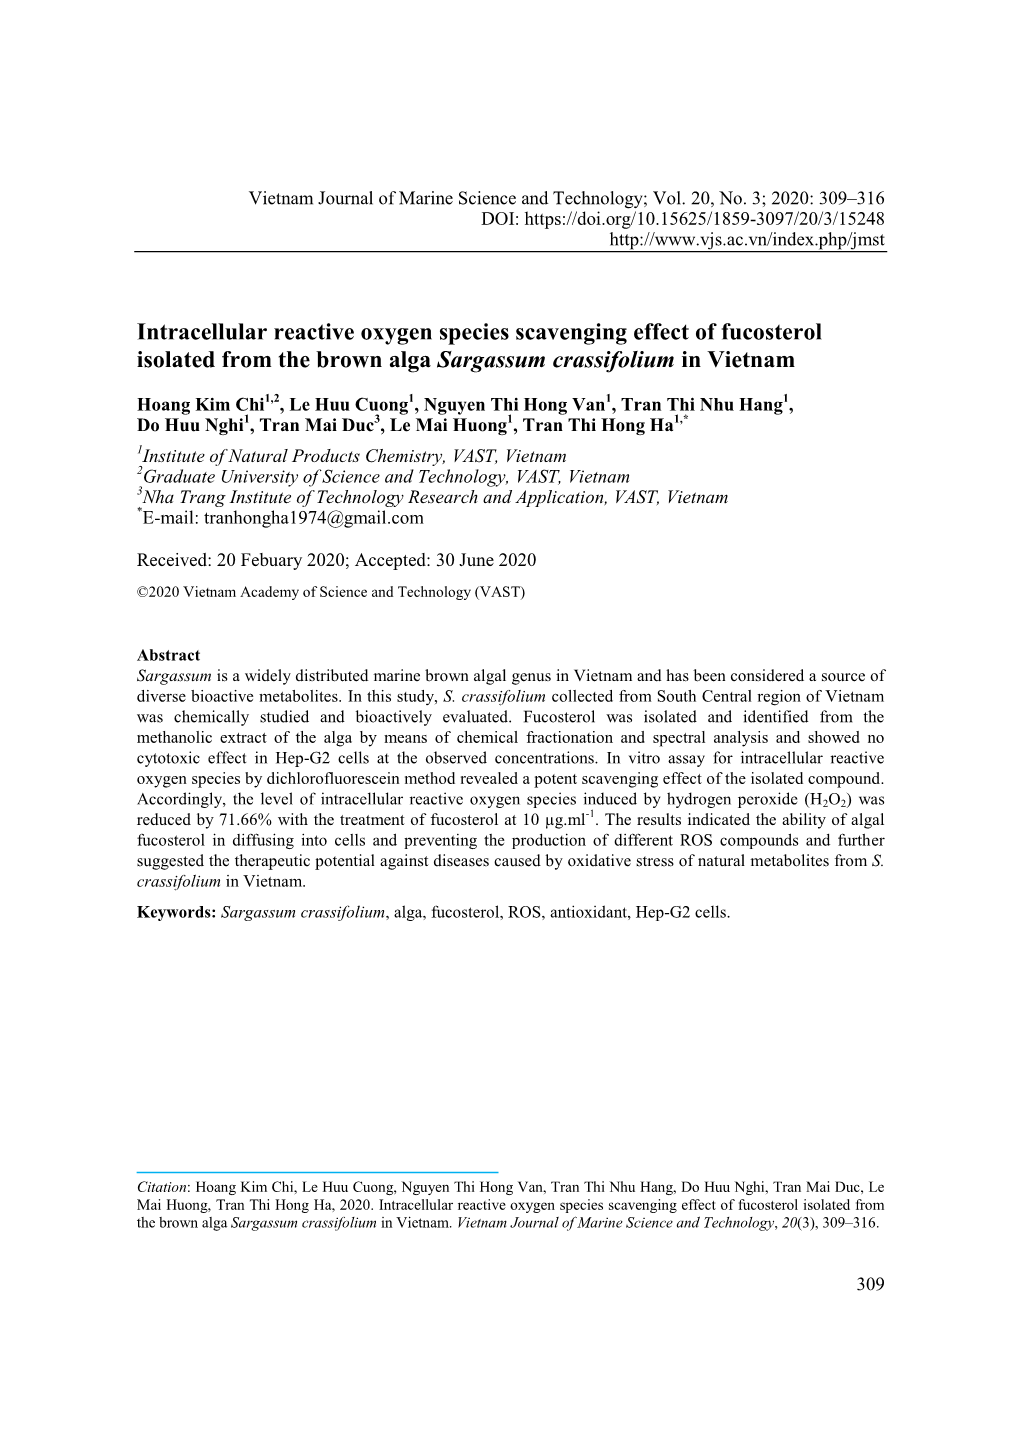 Intracellular Reactive Oxygen Species Scavenging Effect of Fucosterol Isolated from the Brown Alga Sargassum Crassifolium in Vietnam